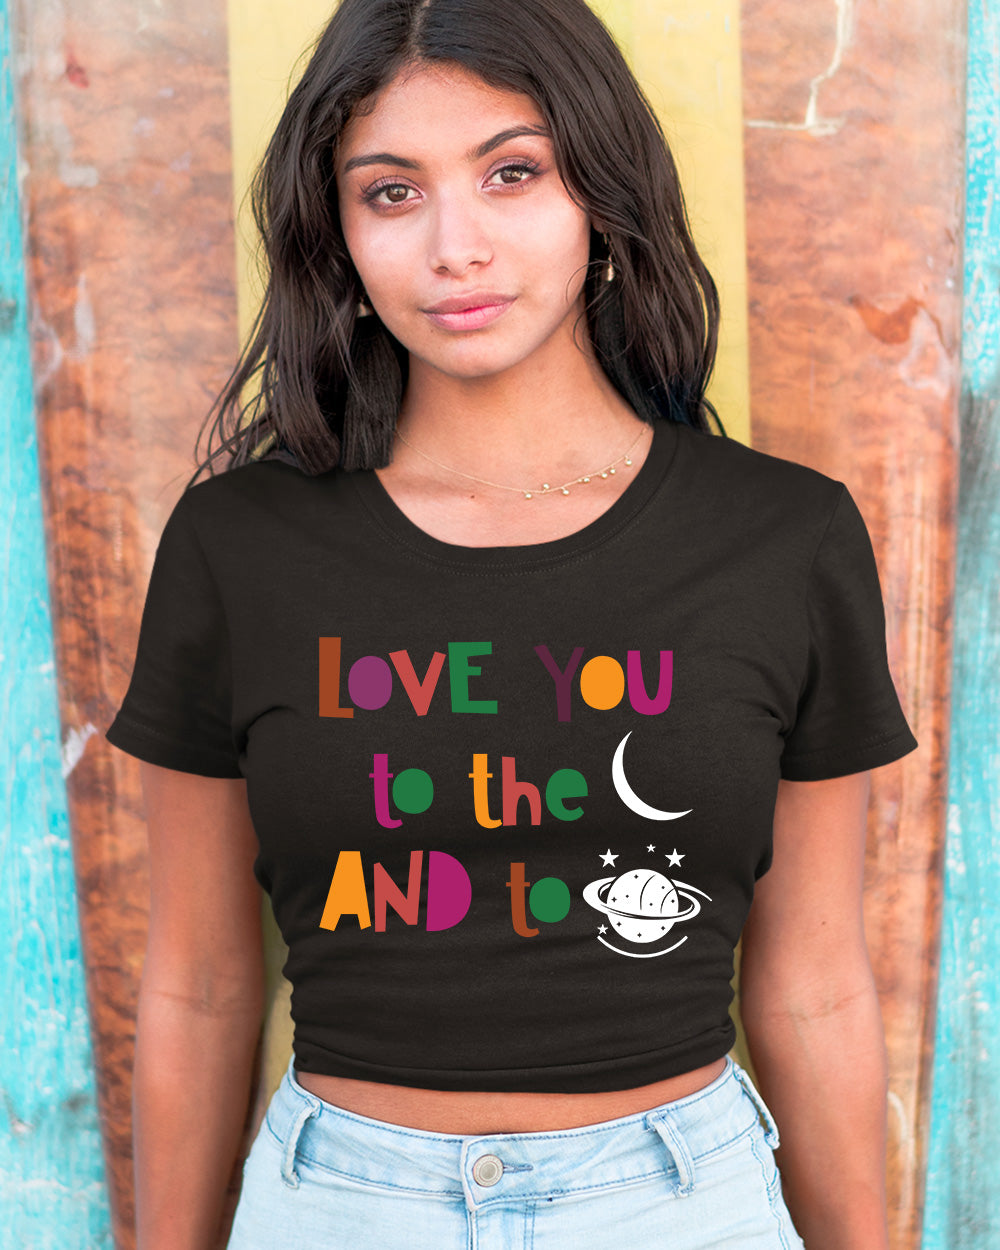 I Love You to The Moon Baby Top Tee Shirt